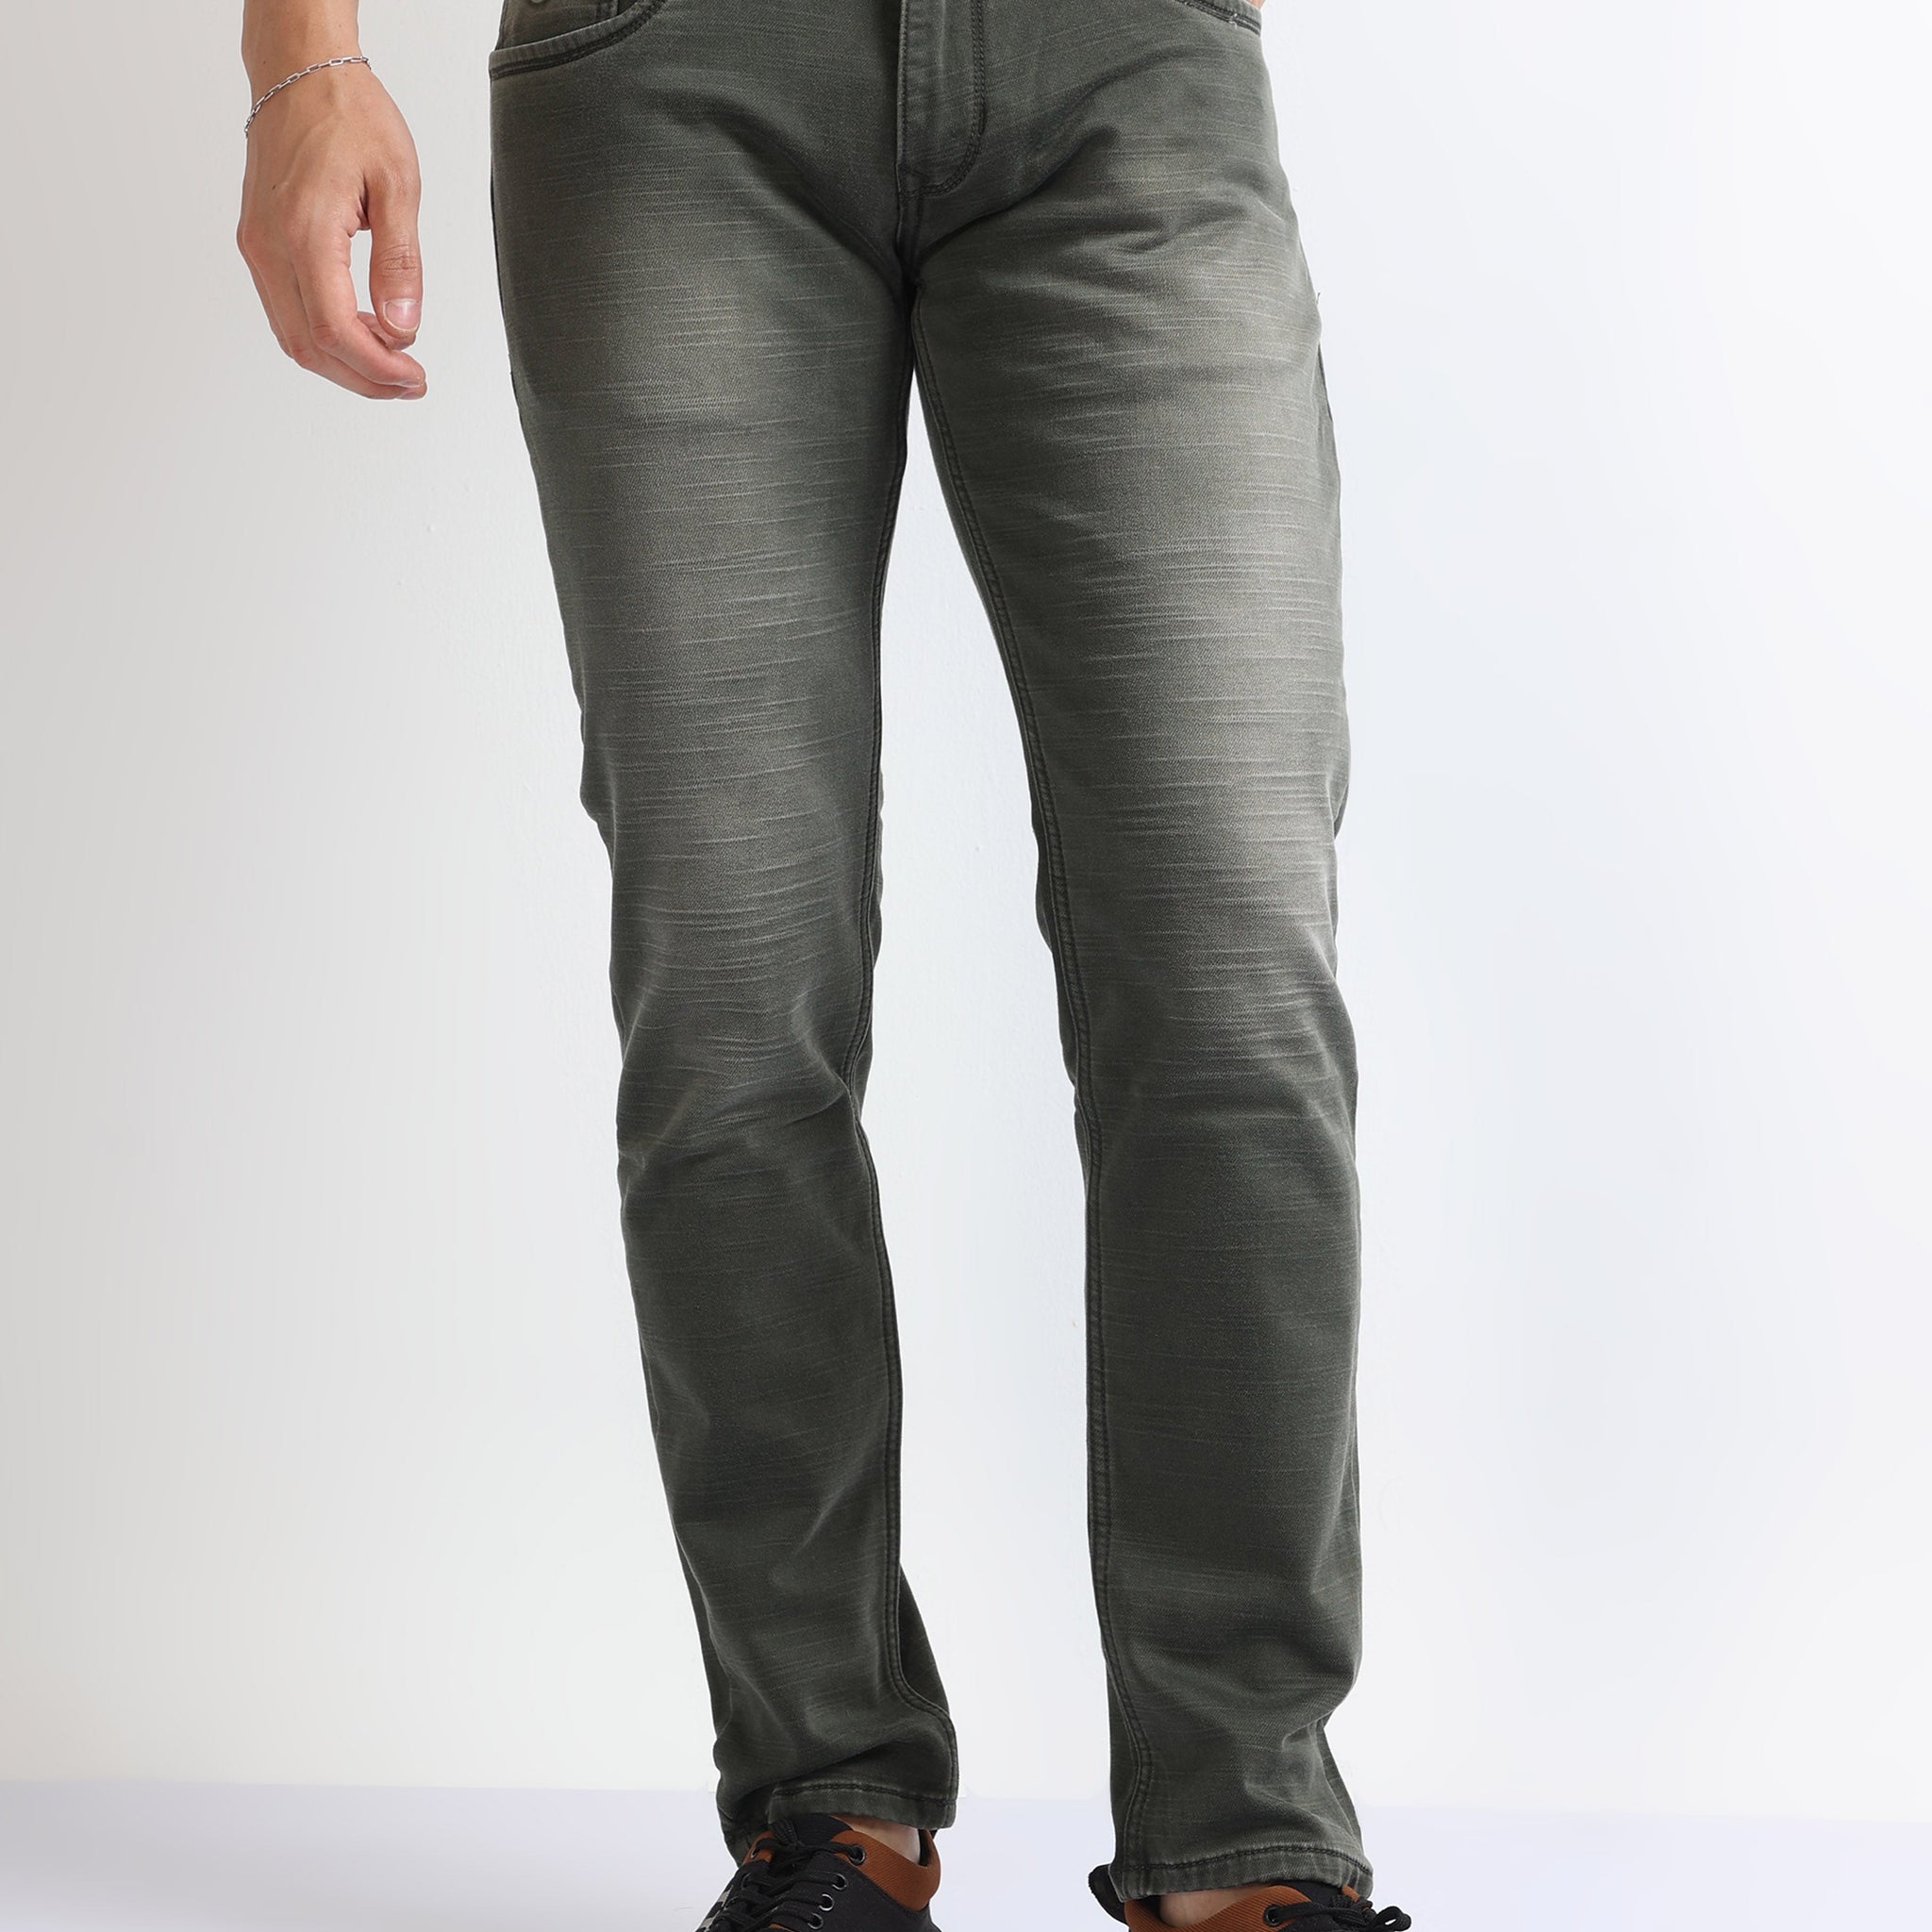 Buy Colored Textured Jean Online.